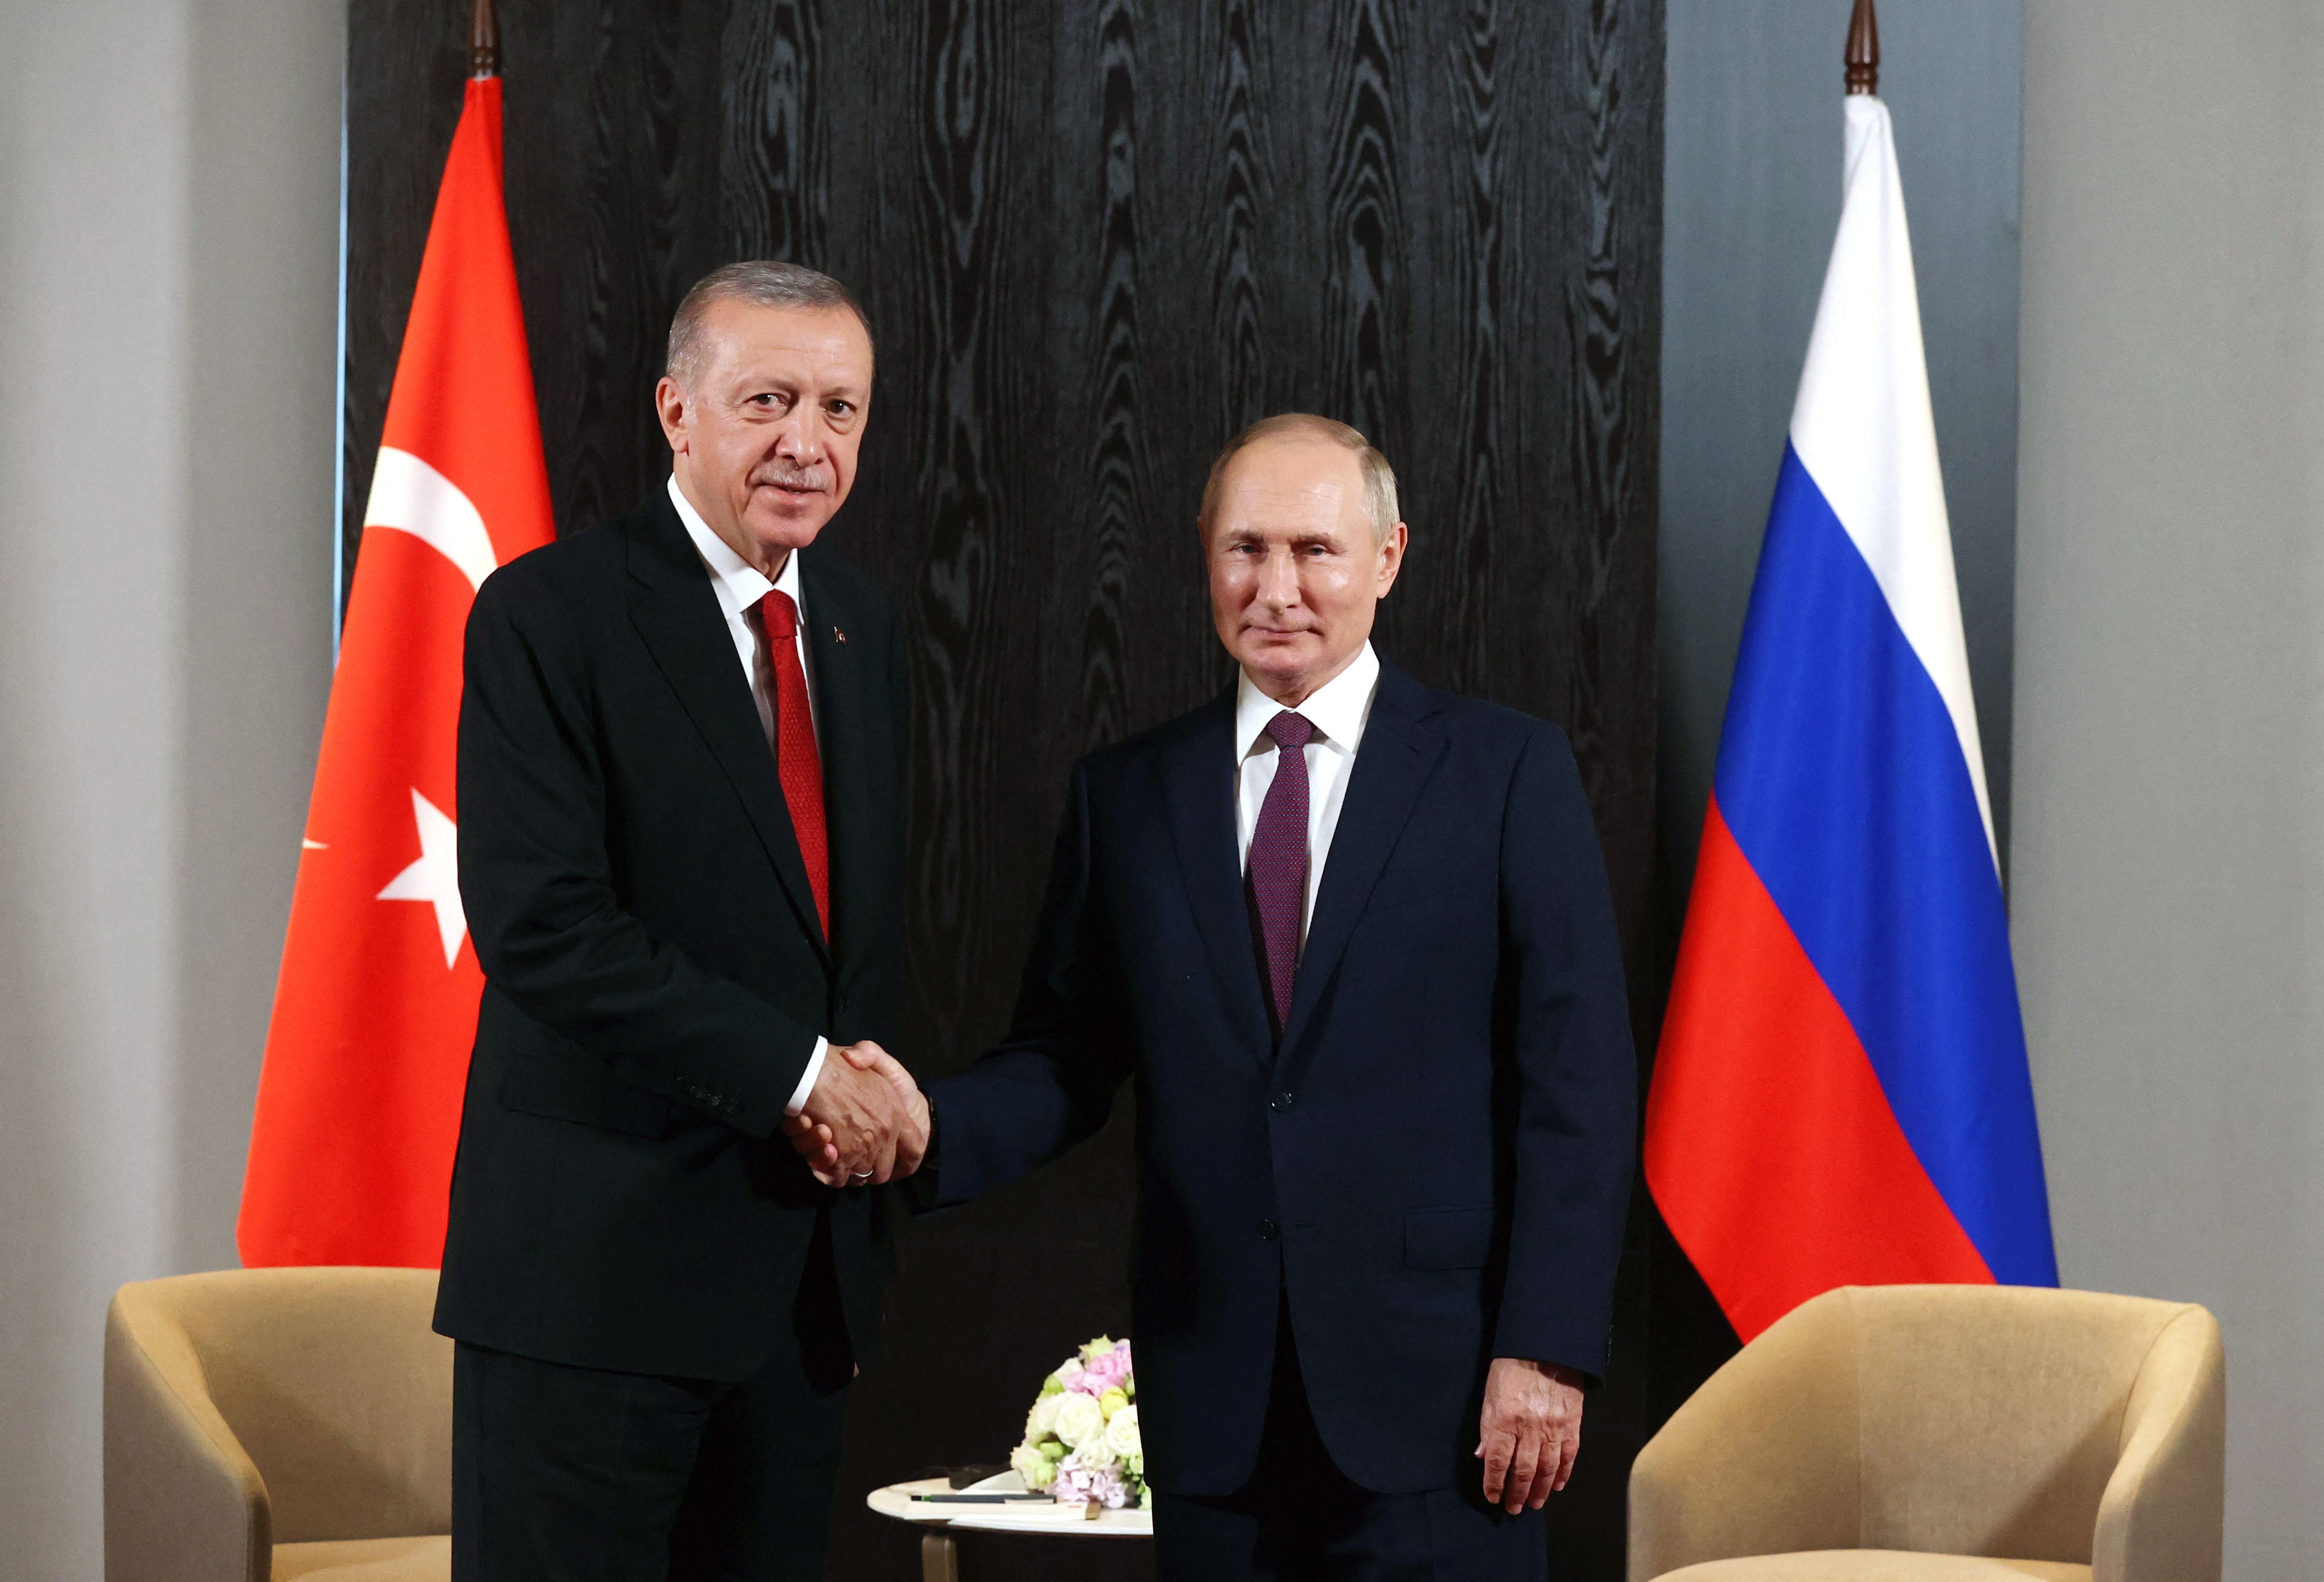 Erdogan after speaking with Putin: grain agreement could be resumed soon